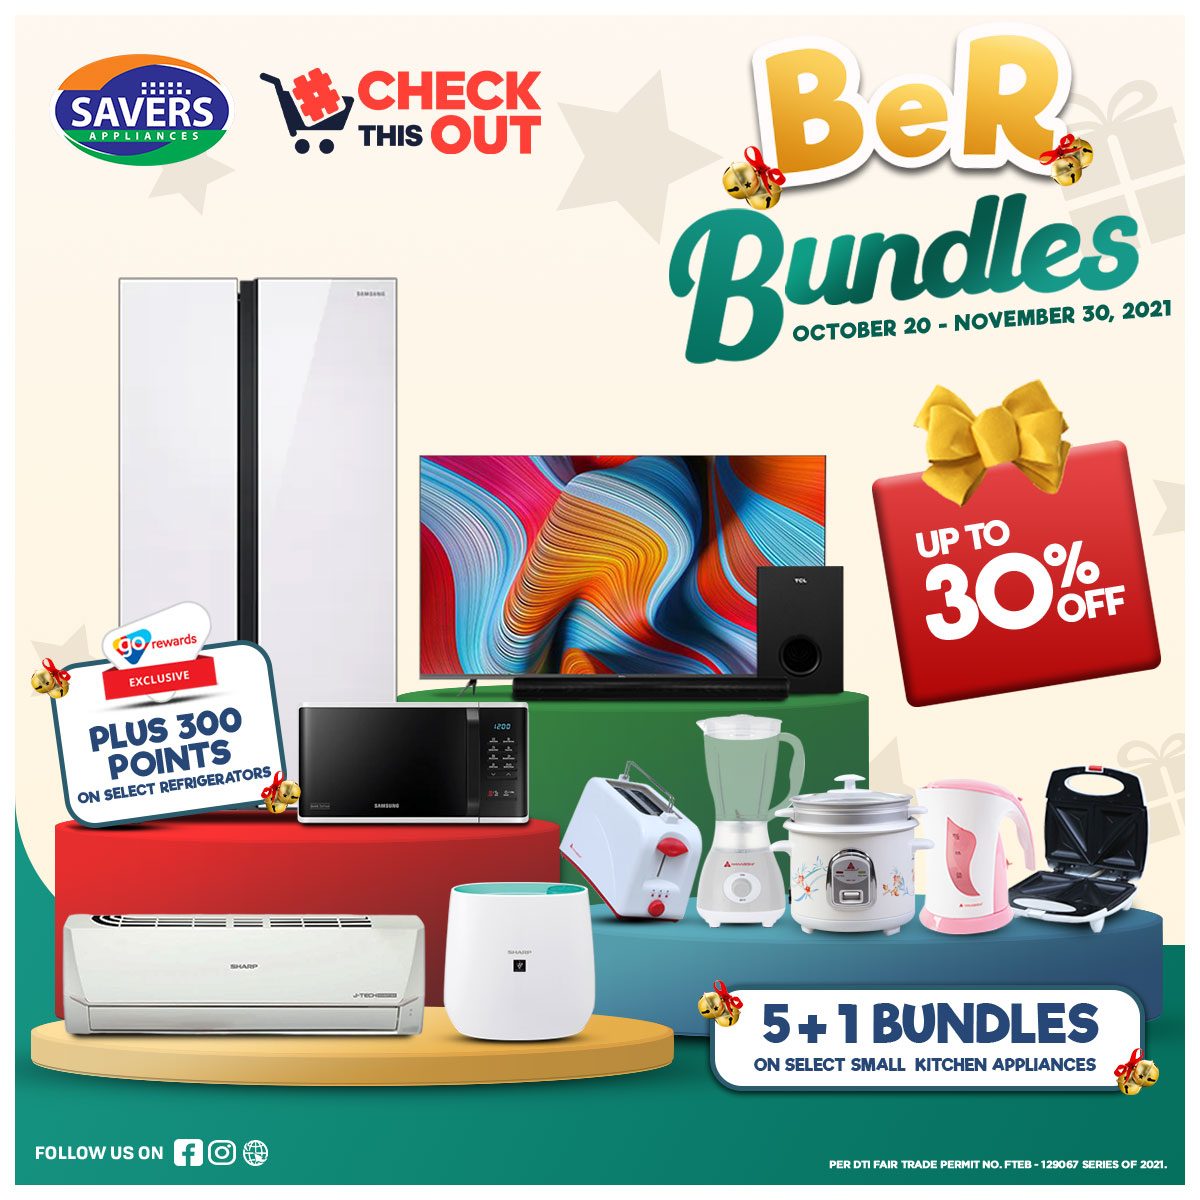 #CheckThisOut: These ‘Ber Bundles’ will save you money on appliances